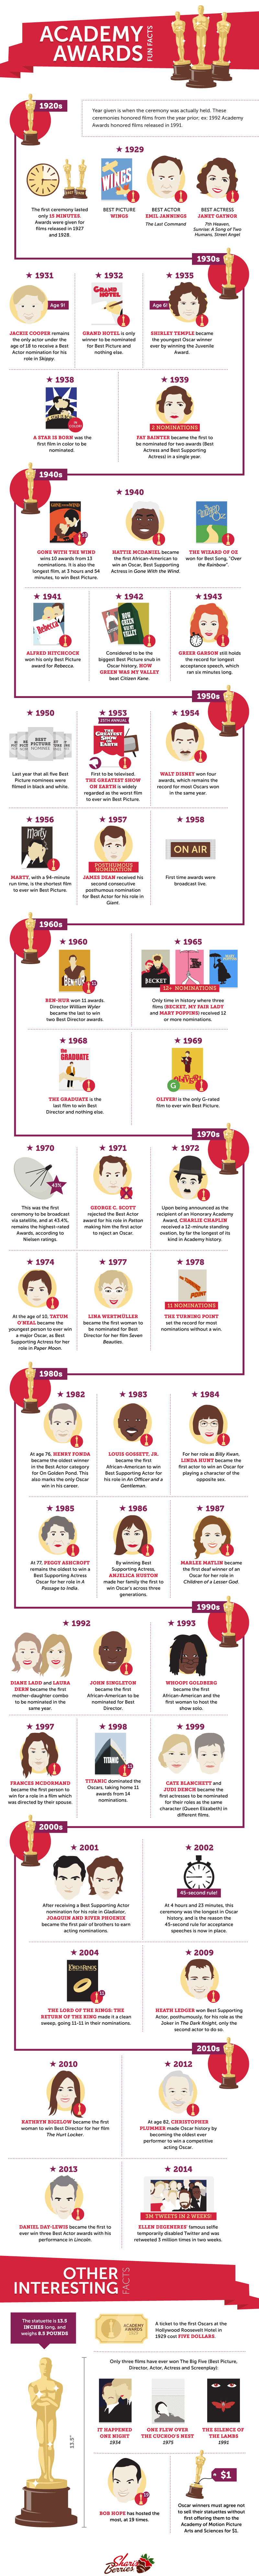 Academy Awards Infographics by berries.com